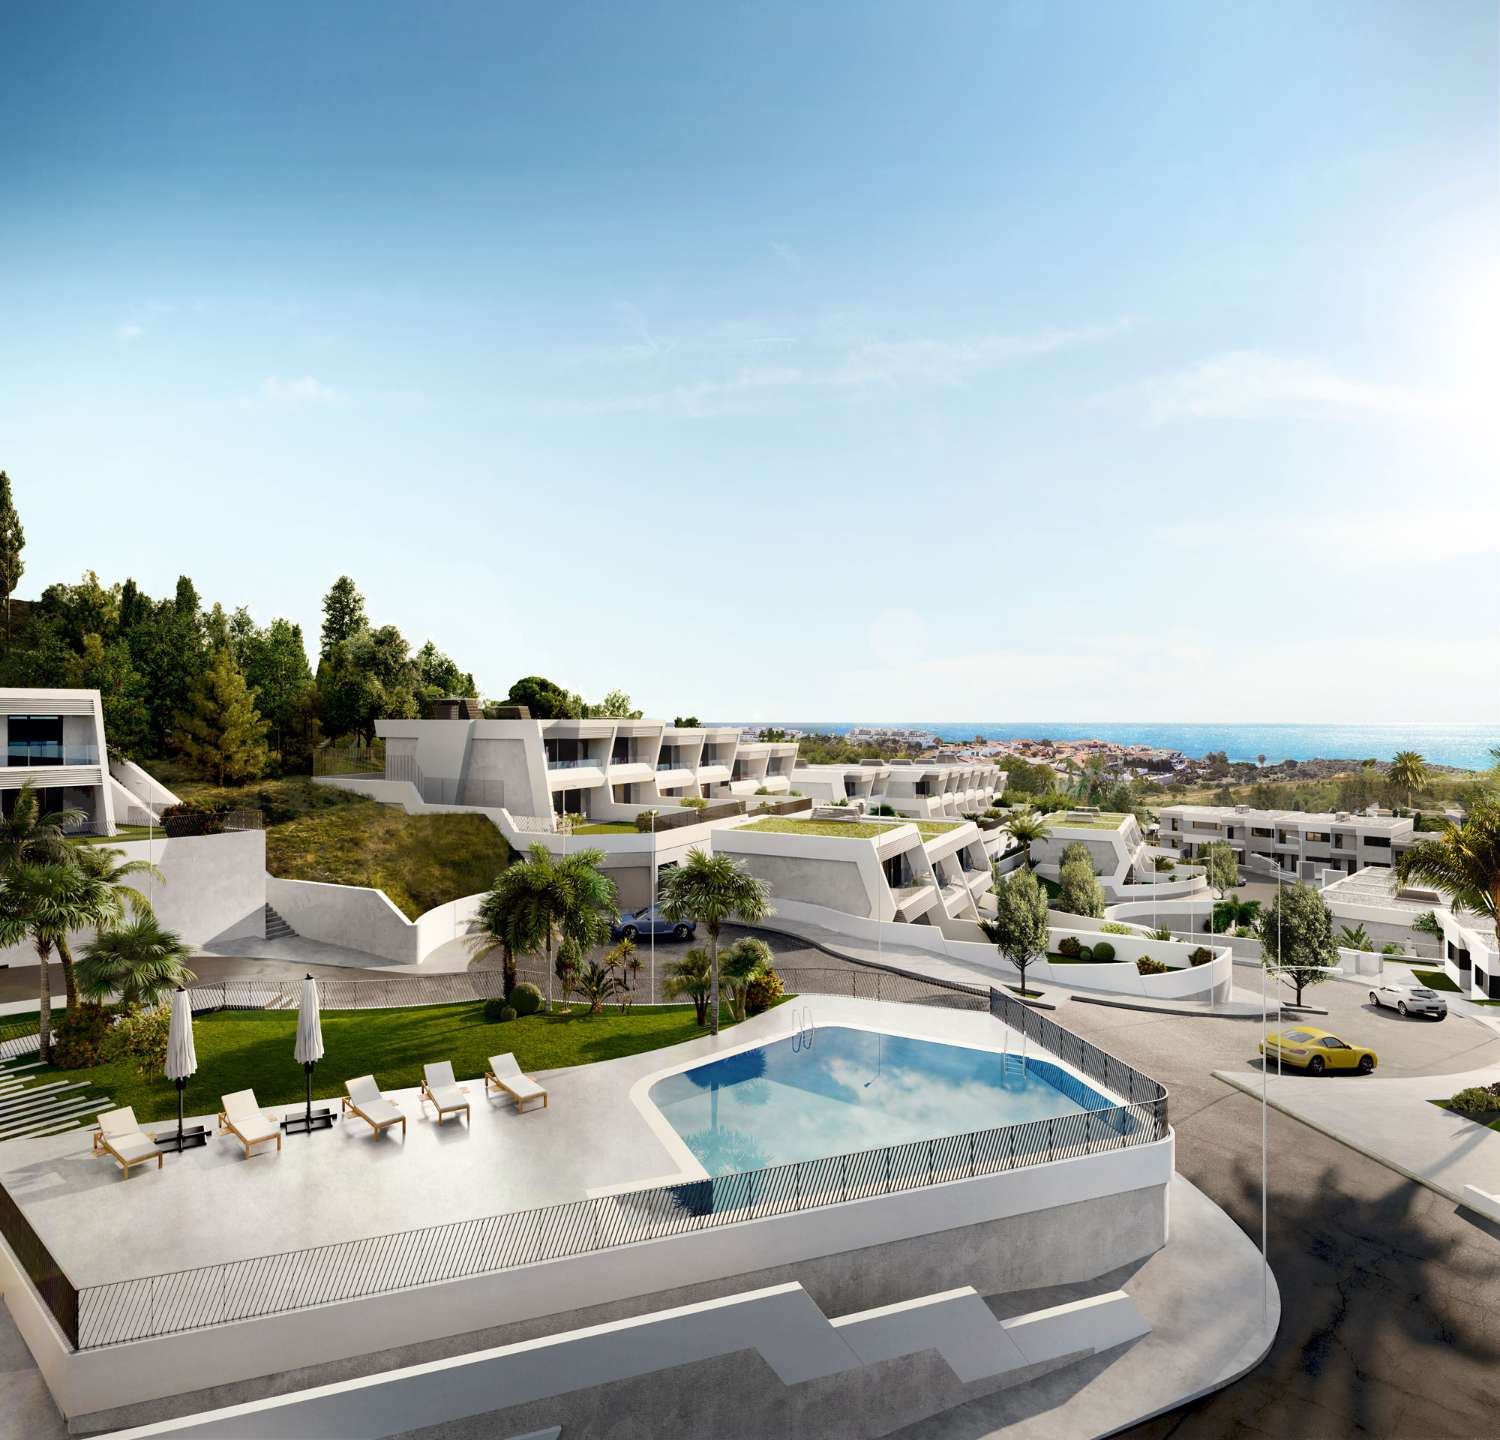 Townhouses with the best views of the Mediterranean in Mijas Costa